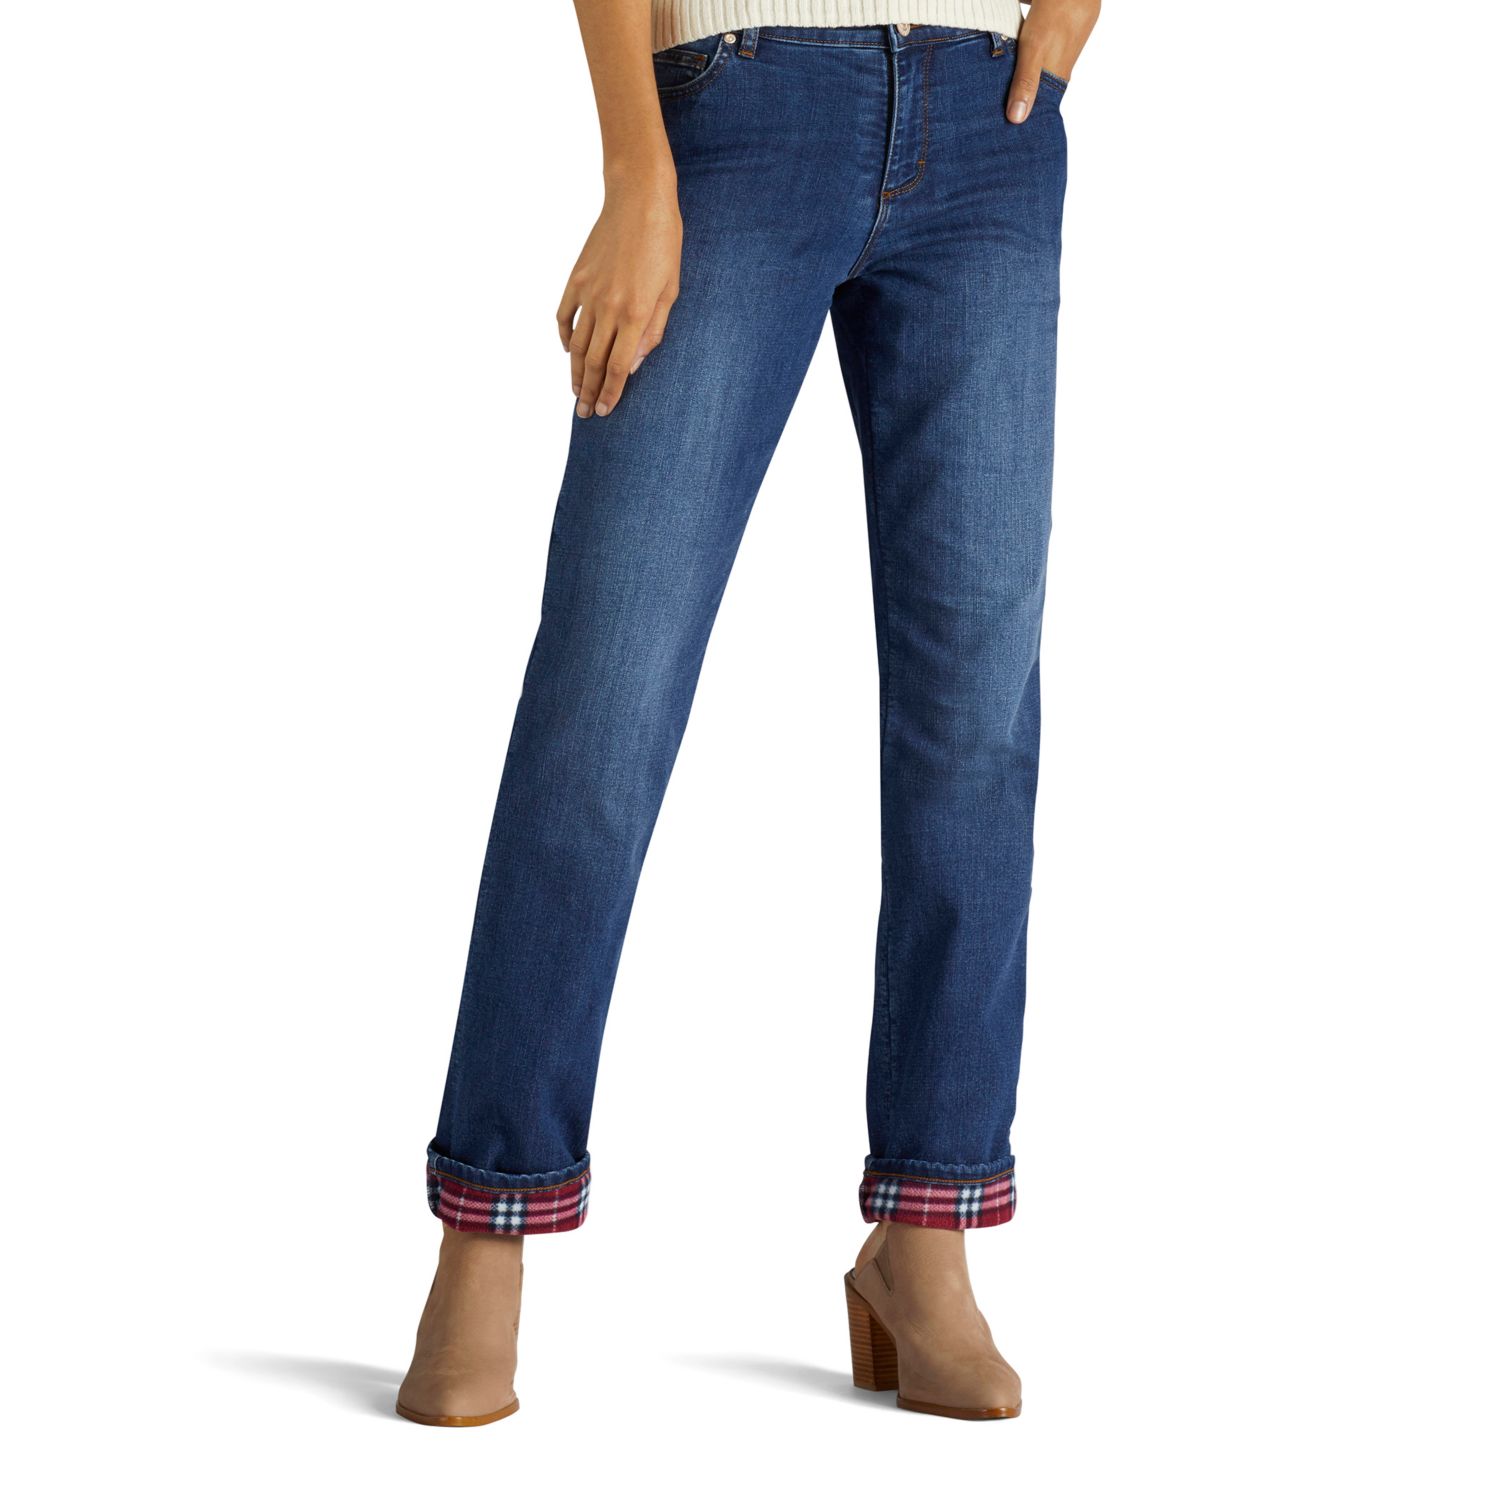 Women's Lee Relaxed Fit Lined Jeans